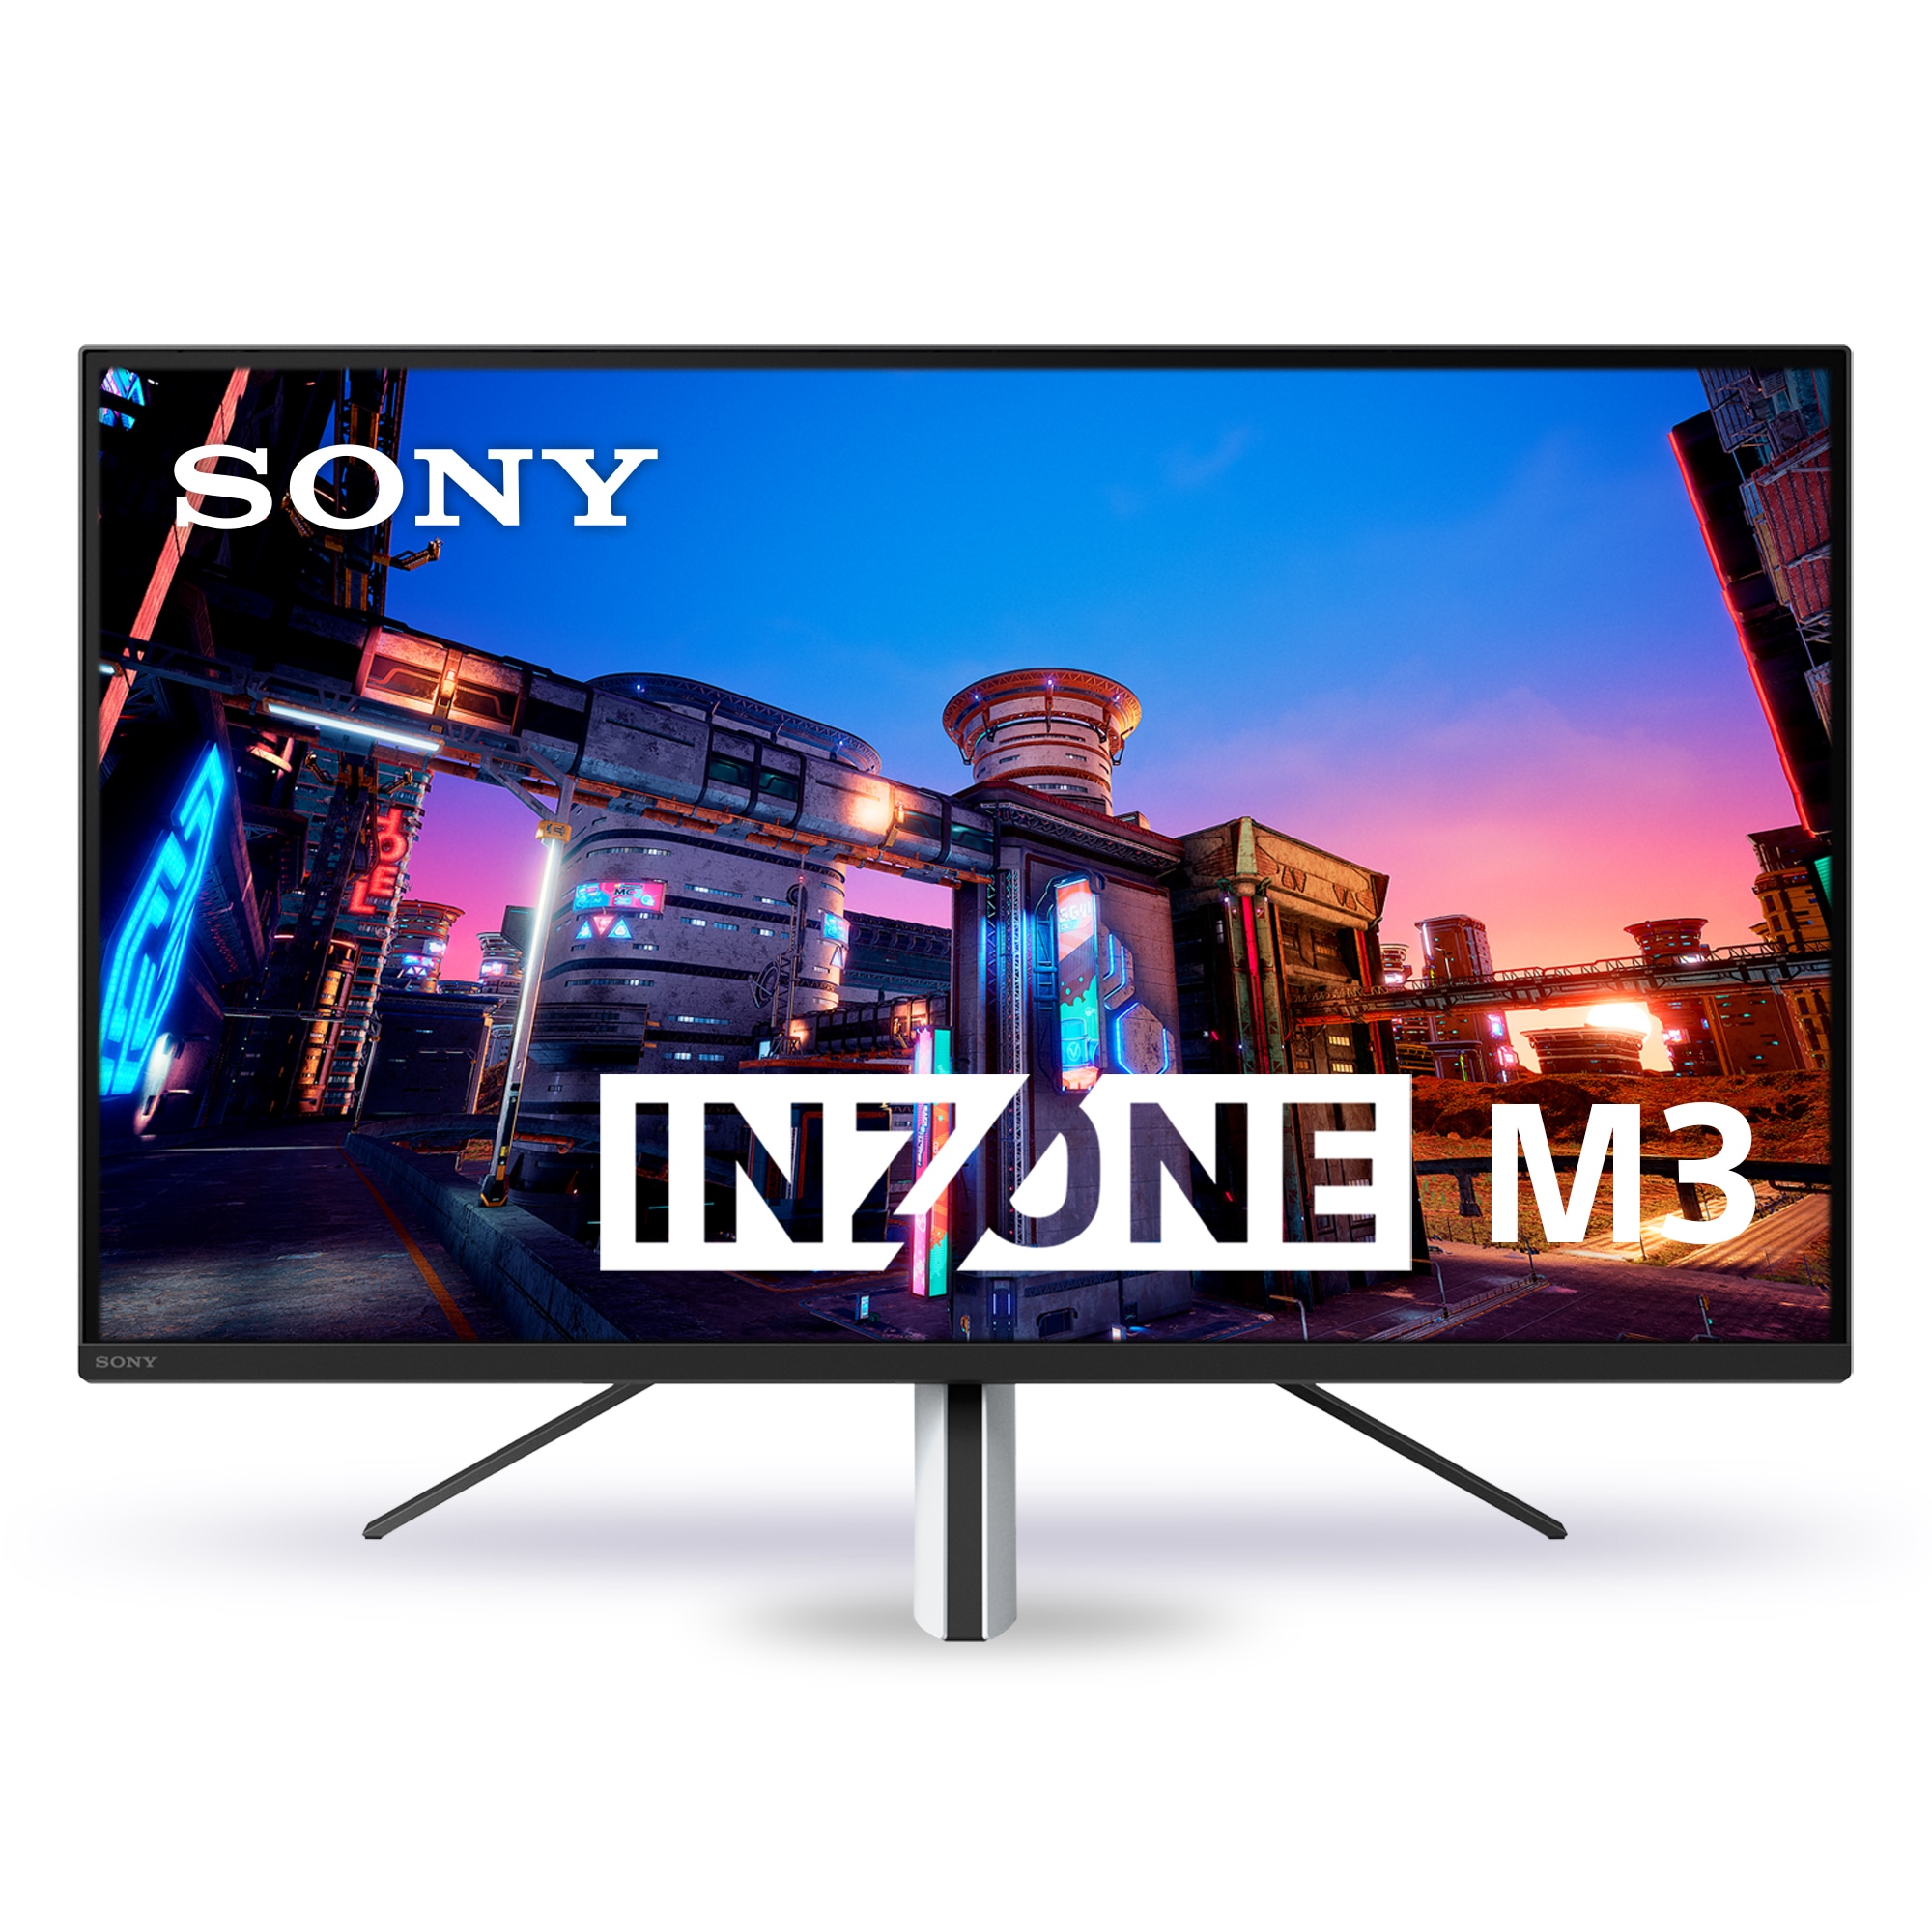 Product image of Sony INZONE M3 monitor